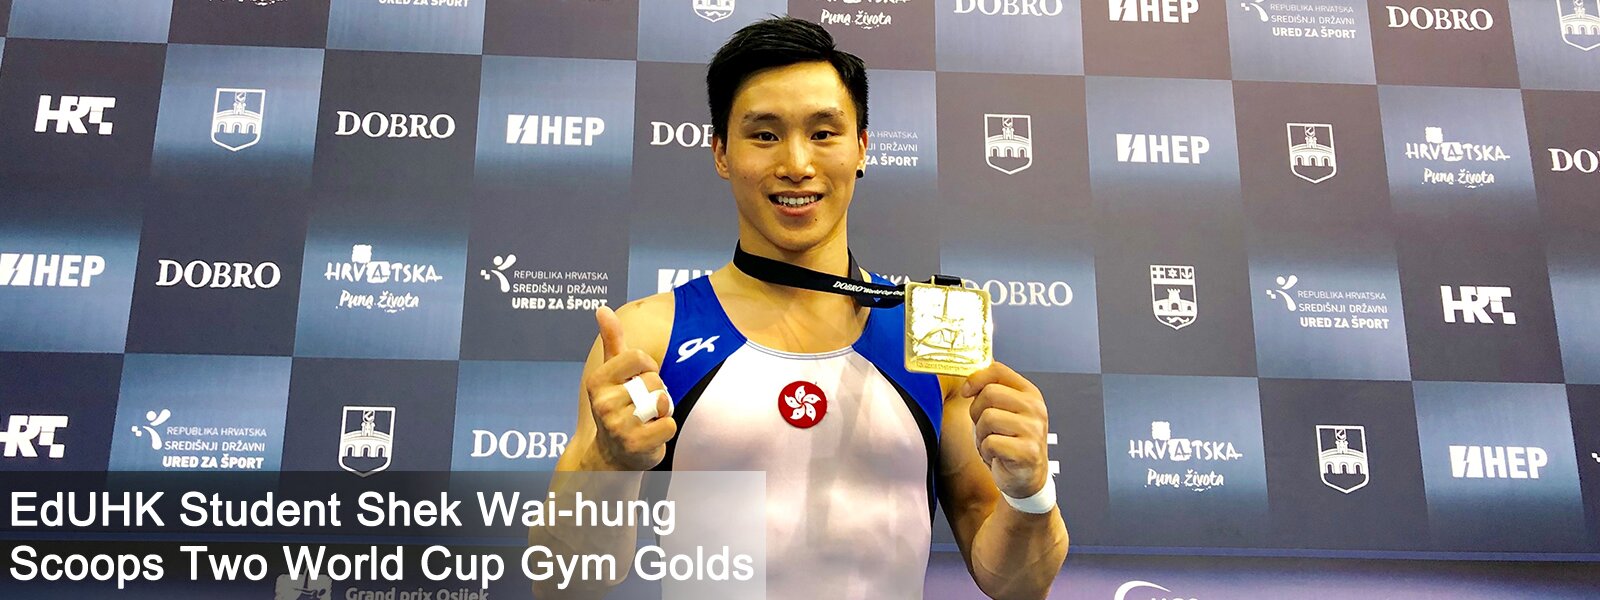 EdUHK Student Shek Wai-hung Scoops Two World Cup Gym Golds